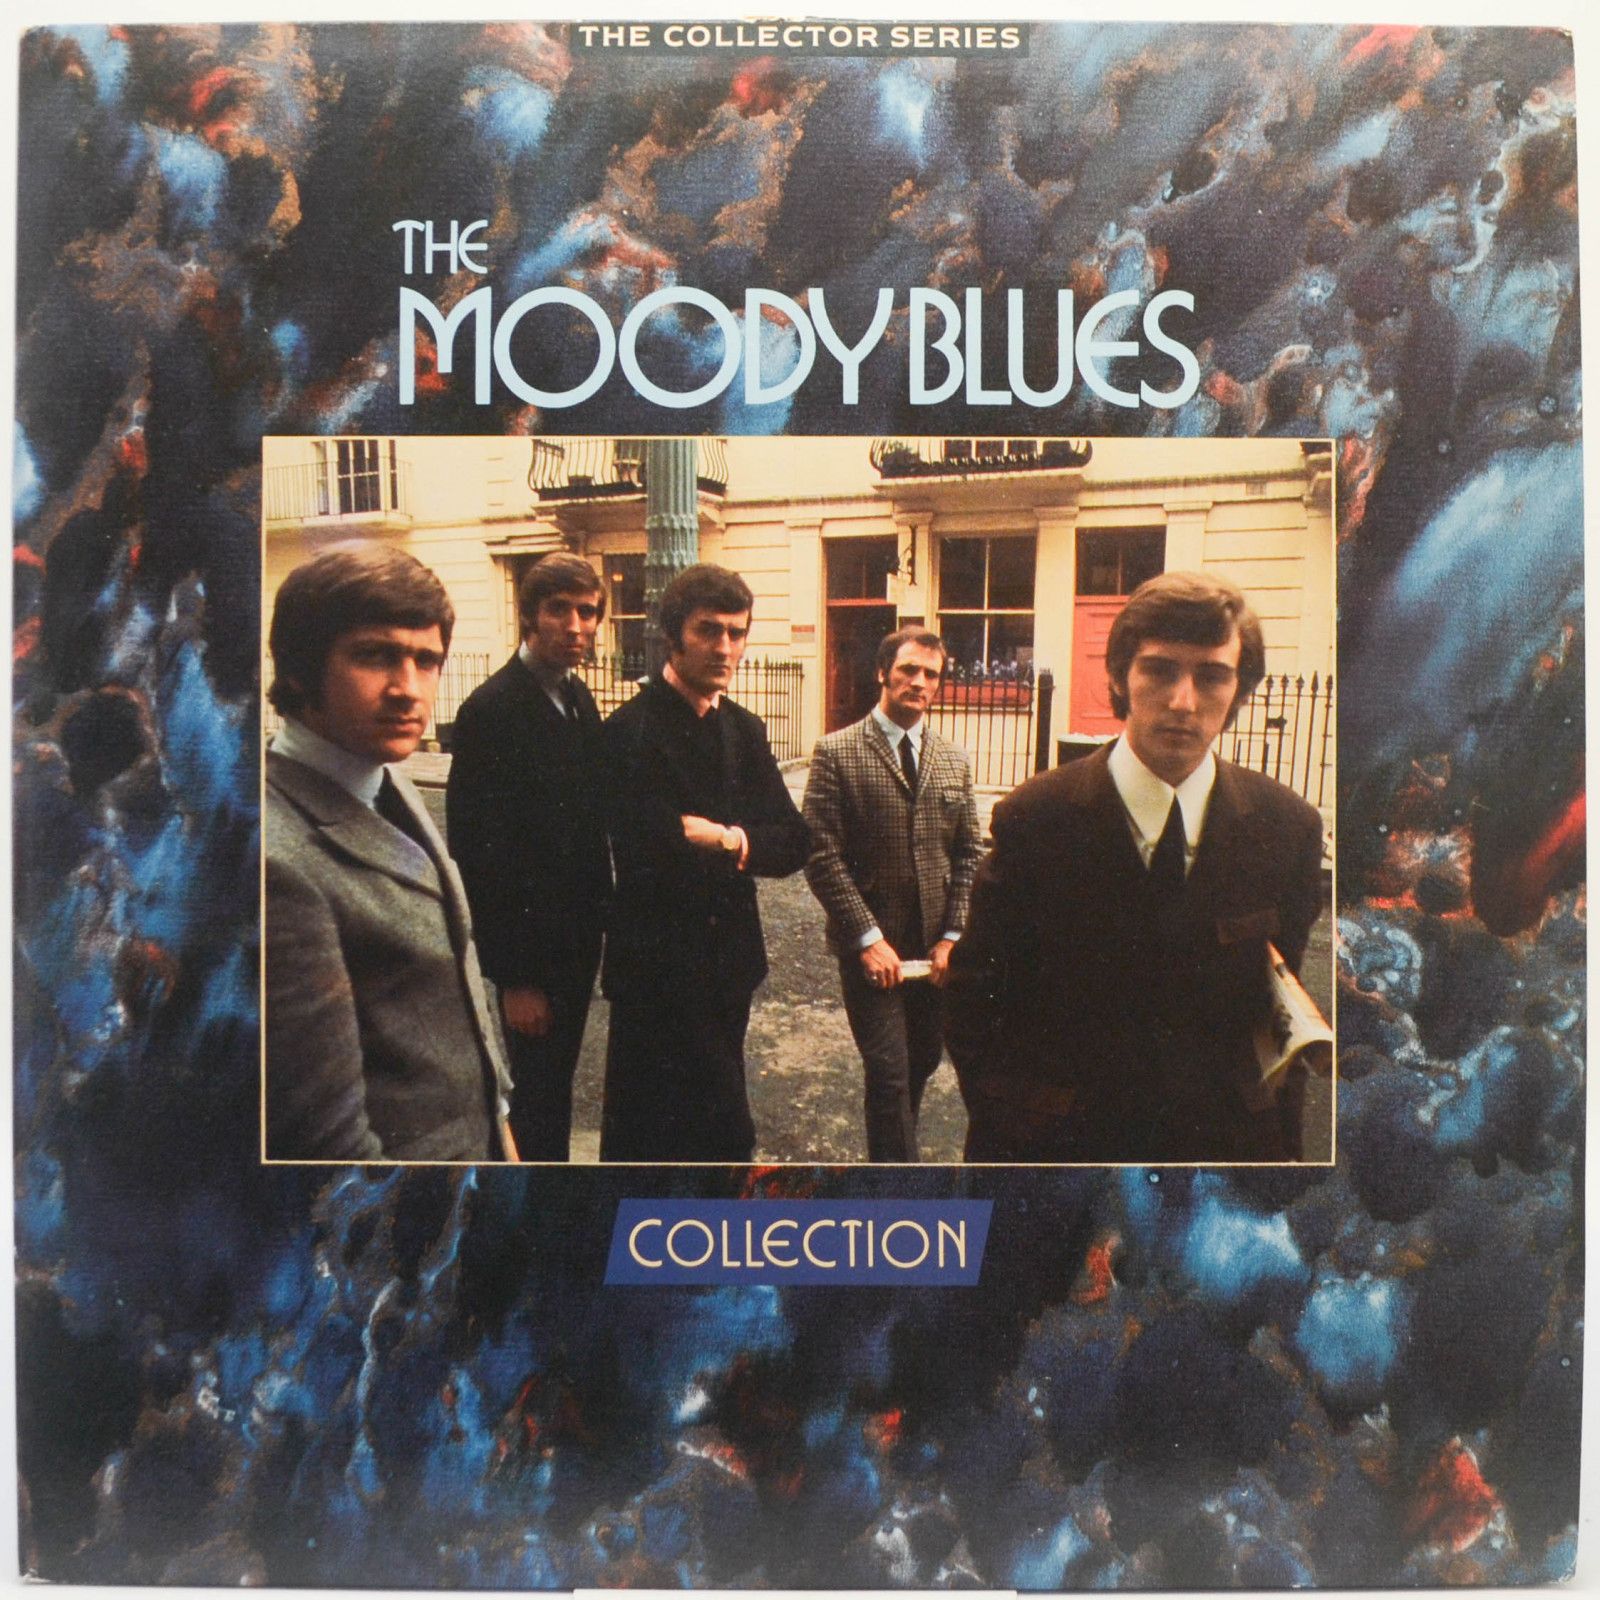 Moody Blues — Collection (2LP, UK), 1985